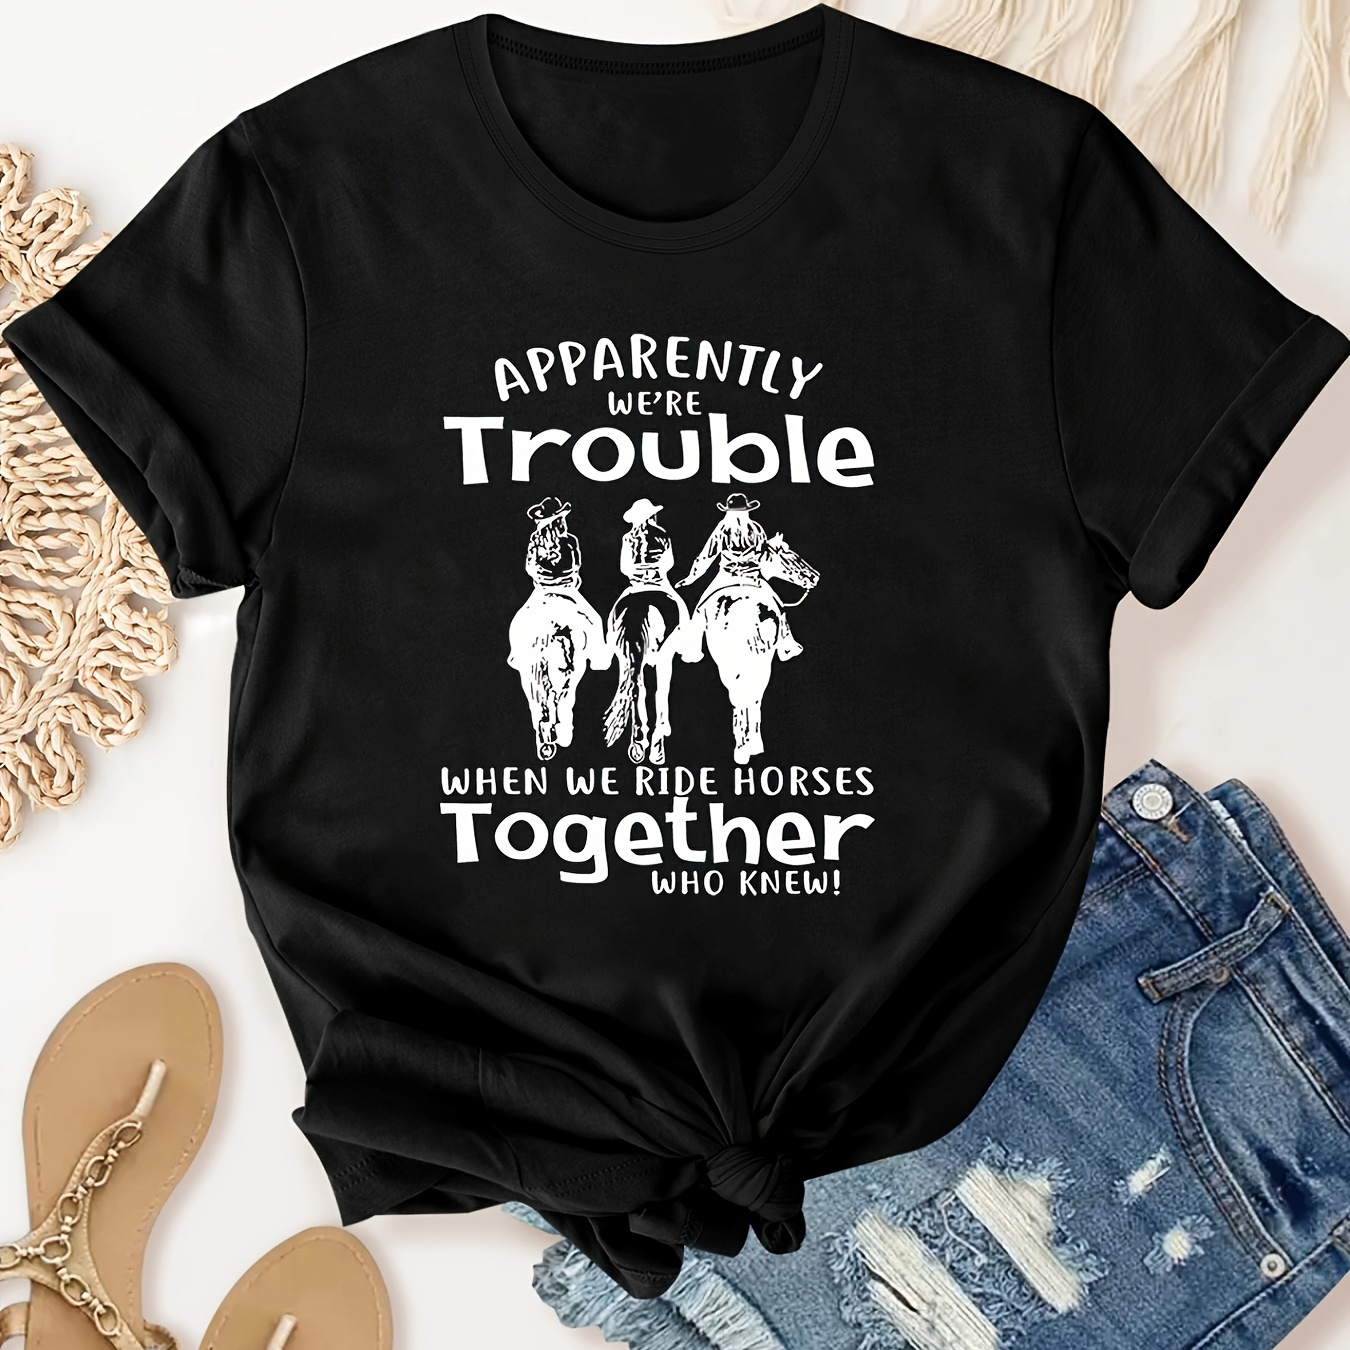 

Apparently We're Trouble Print T-shirt, Crew Neck Short Sleeve T-shirt, Casual Sport Tops, Women's Clothing